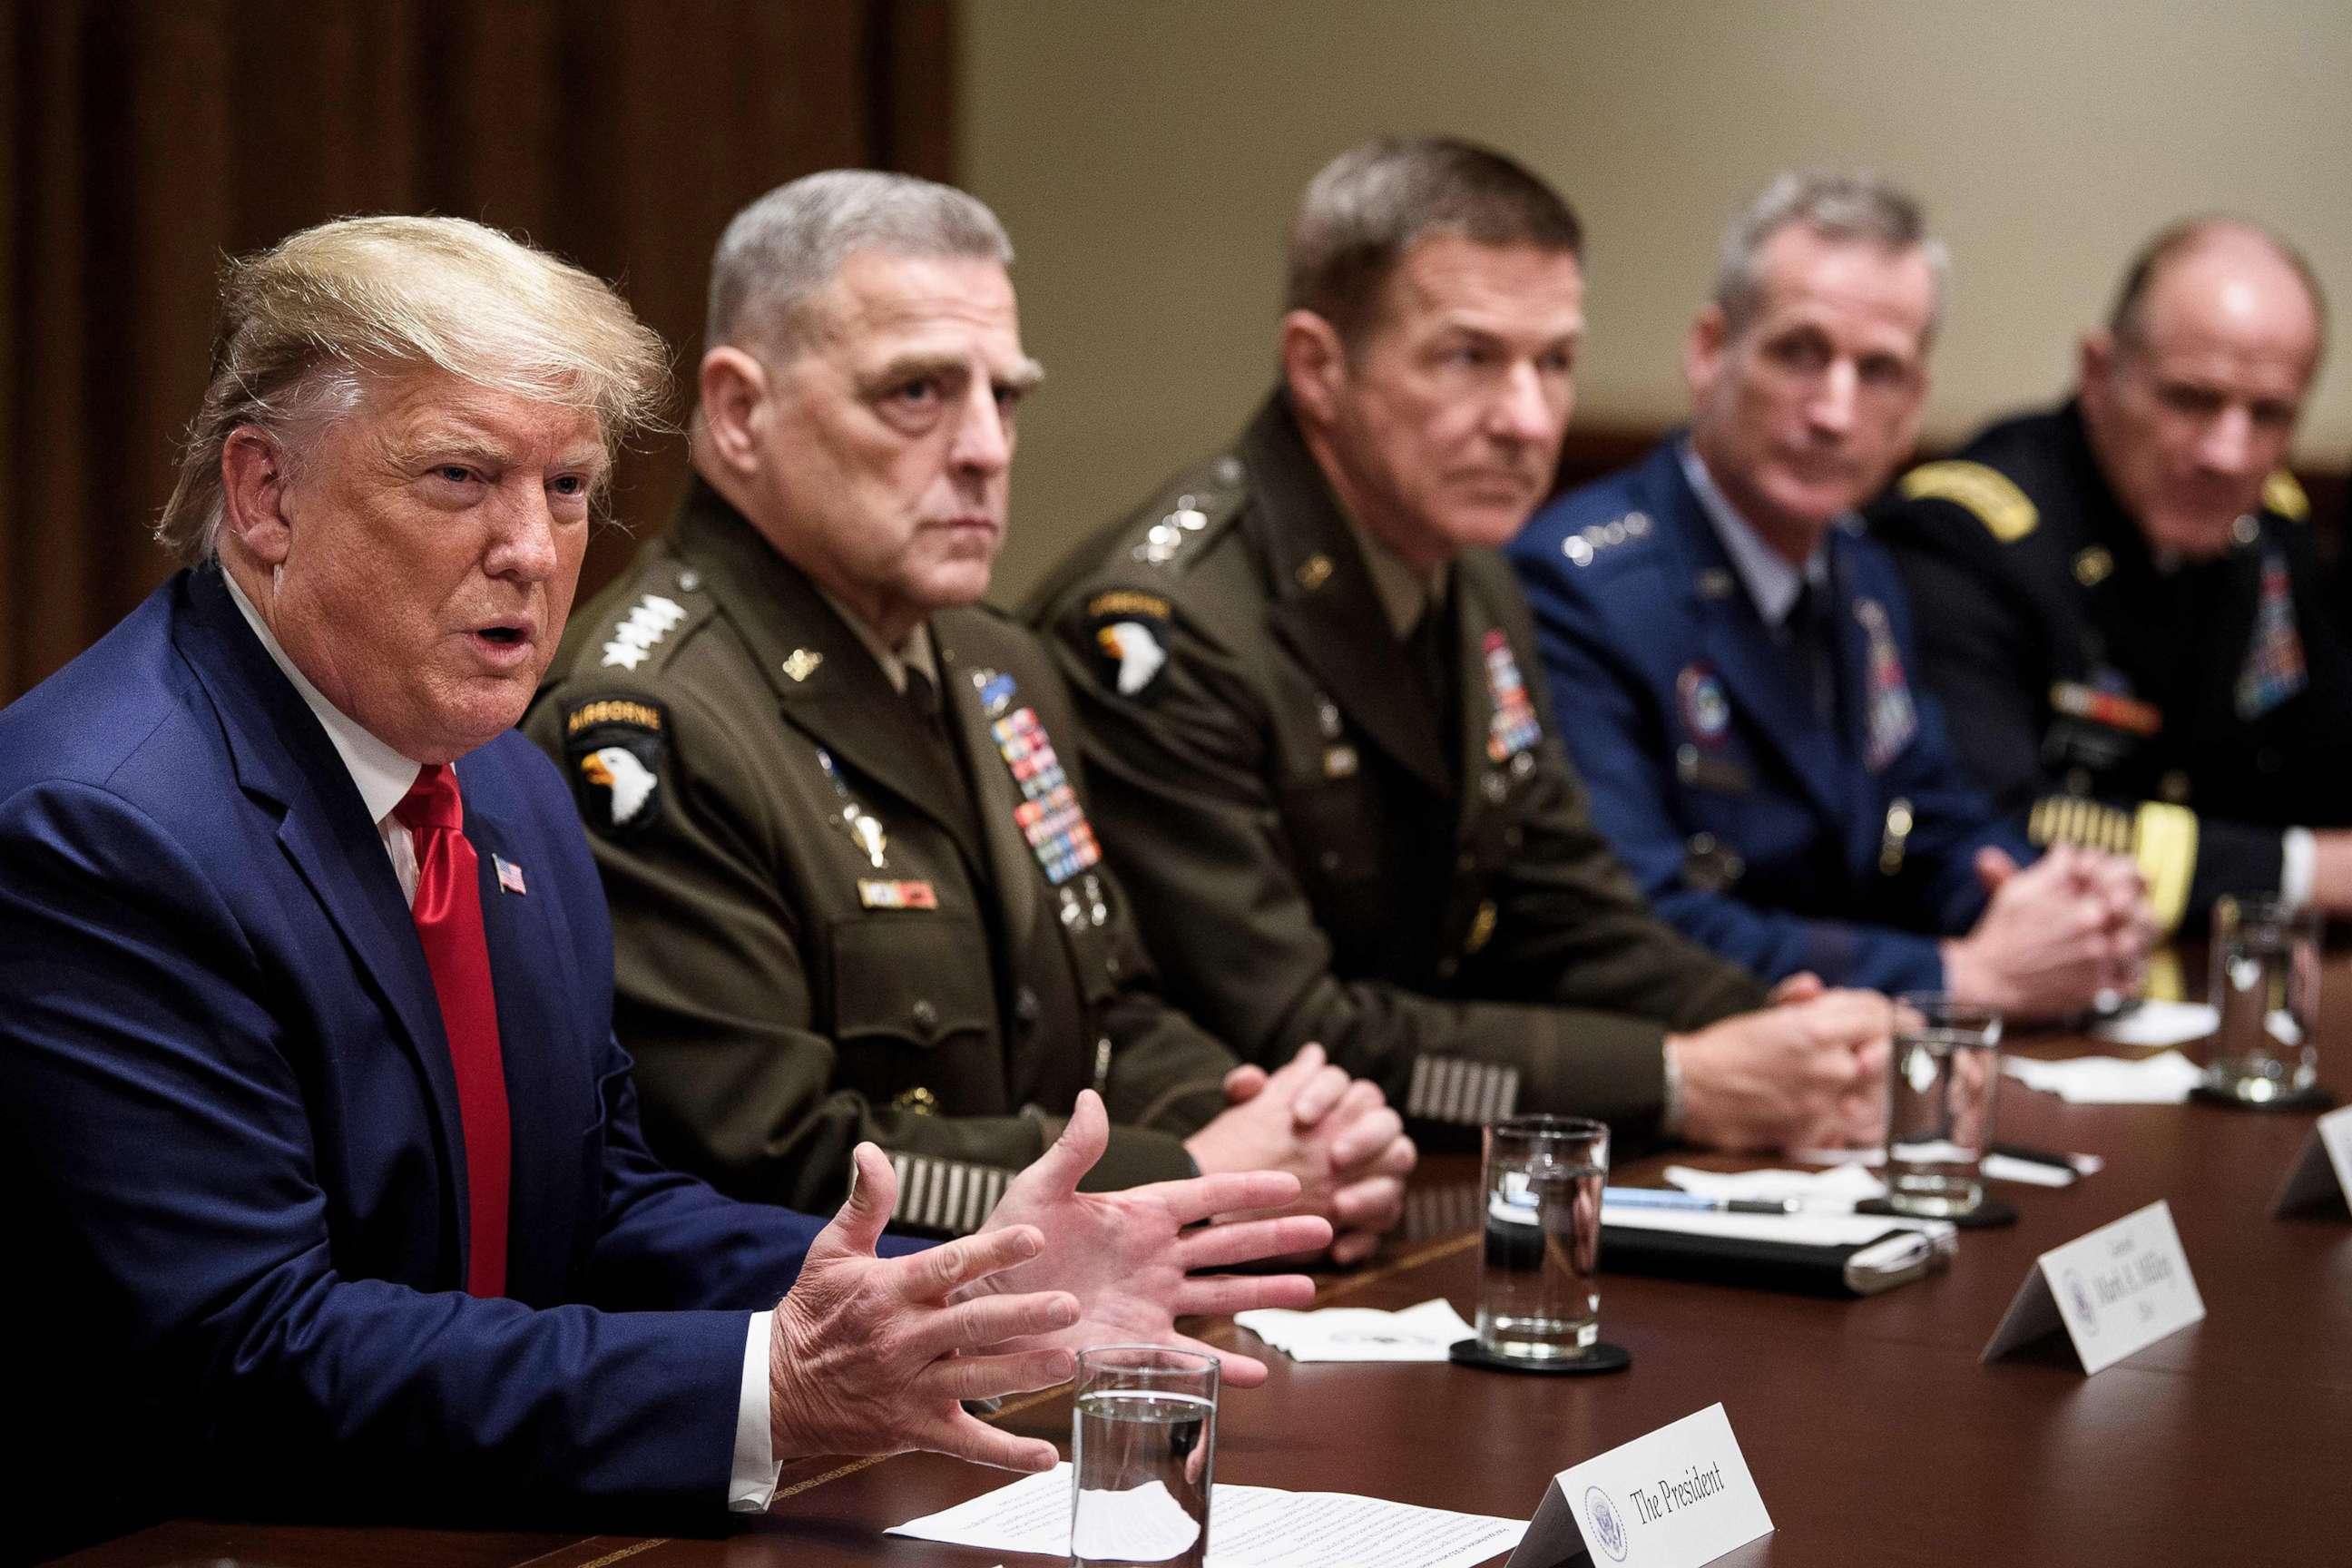 PHOTO: President Donald Trump speaks during a meeting with senior military leaders including Chairman of the Joint Chiefs of Staff Army General Mark A. Milley, seated next to Trump, in the Cabinet Room of the White House Oct. 7, 2019.